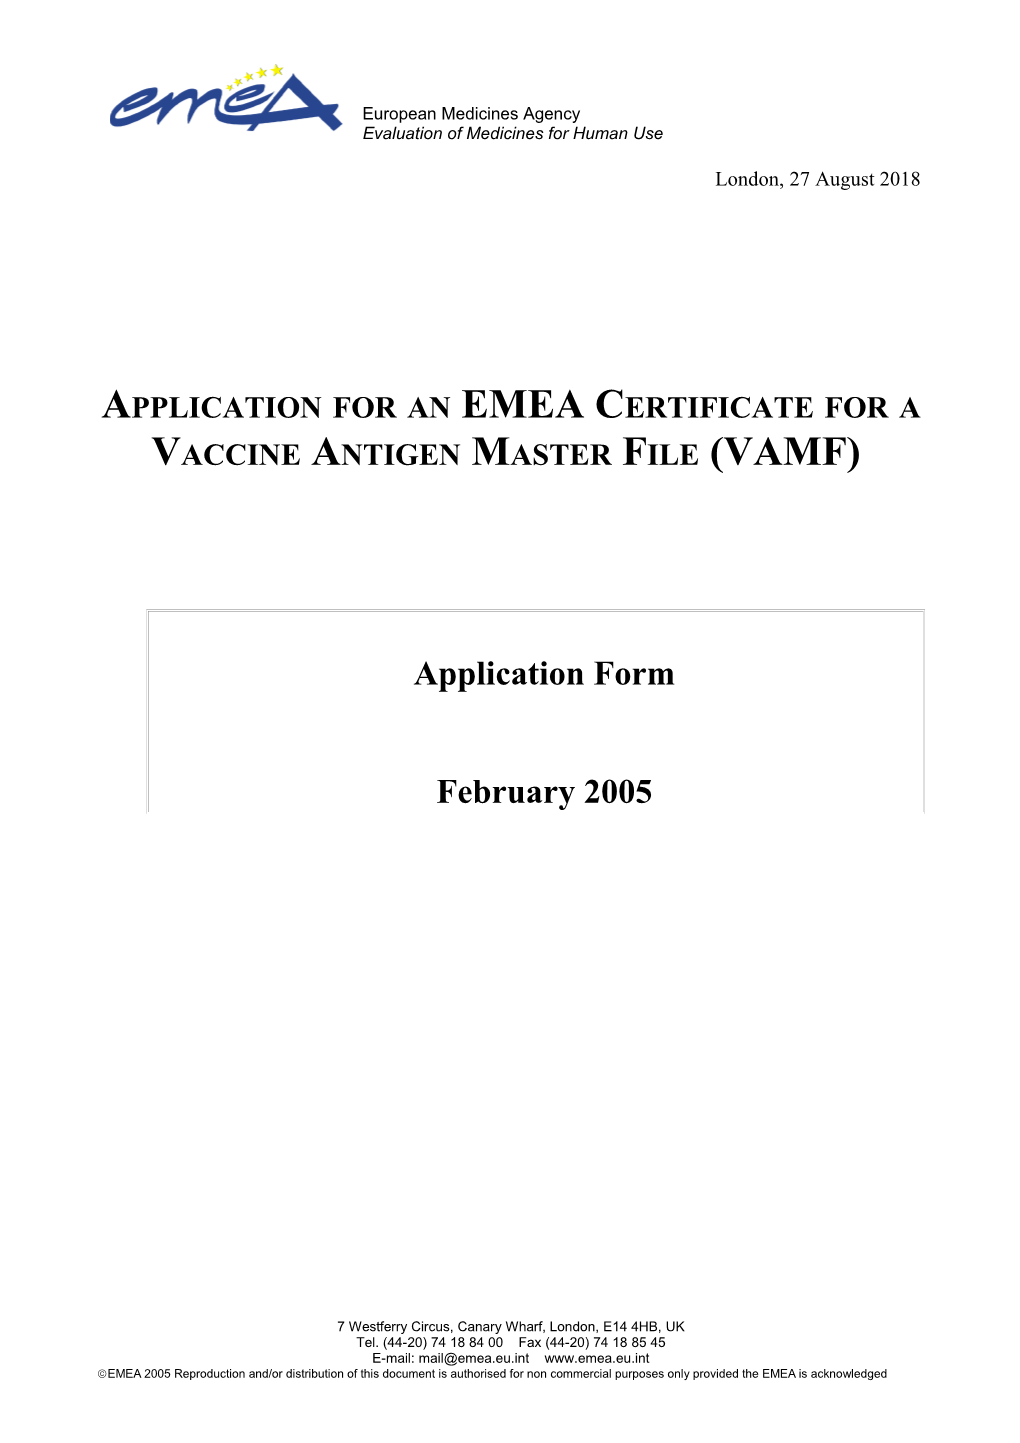 Application for an EMEA Certificate for a Vaccine Antigen Master File (VAMF)